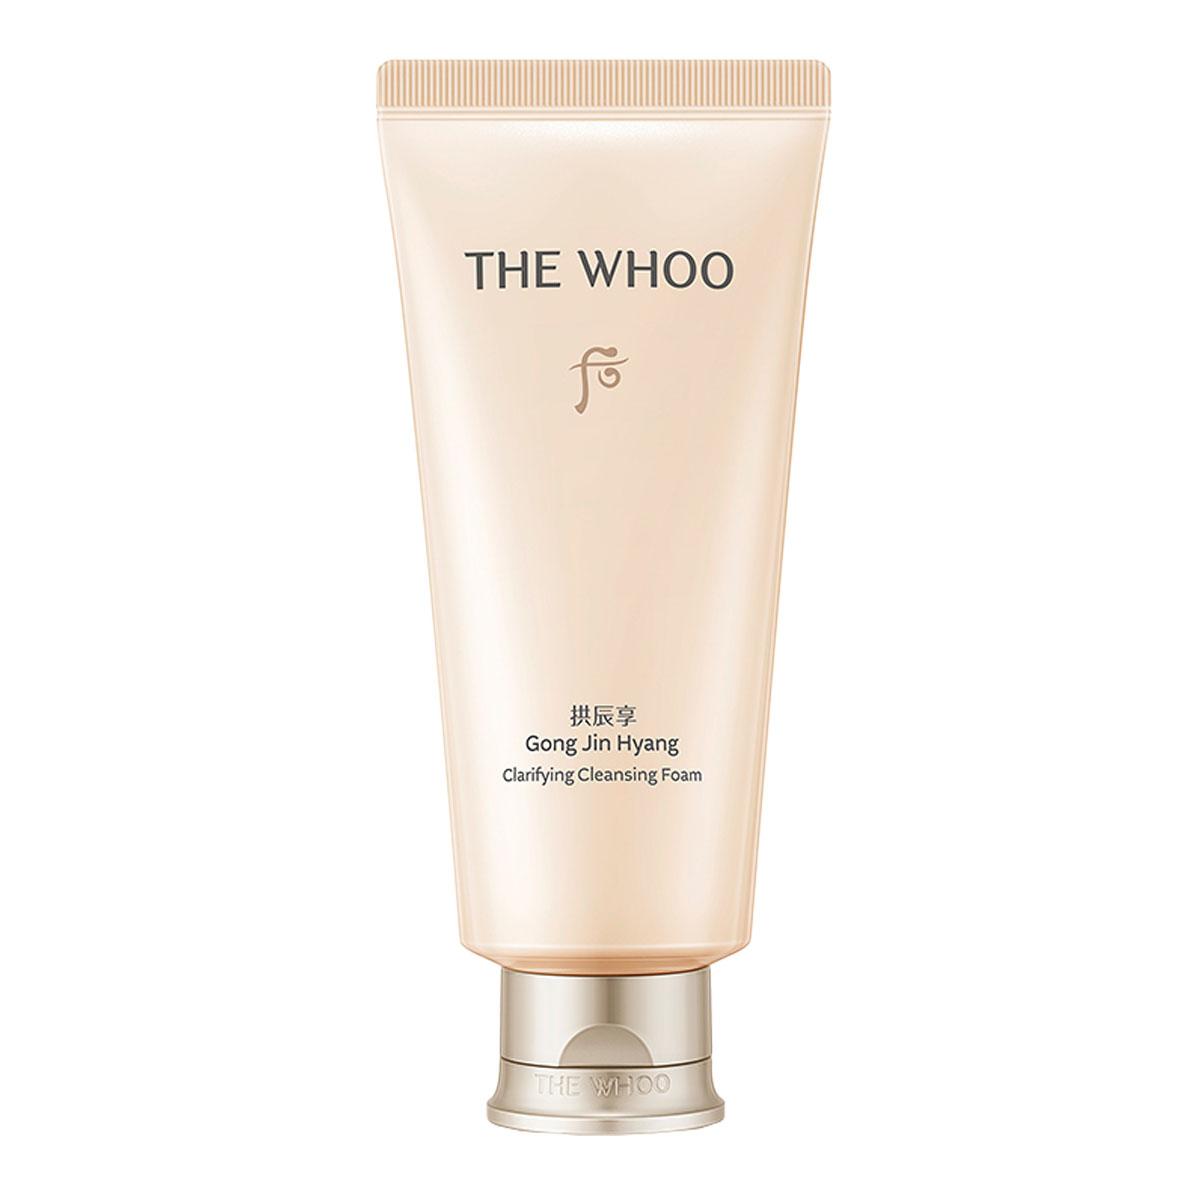 The History of Whoo - Gong Jin Hyang Clarifying Cleansing Foam